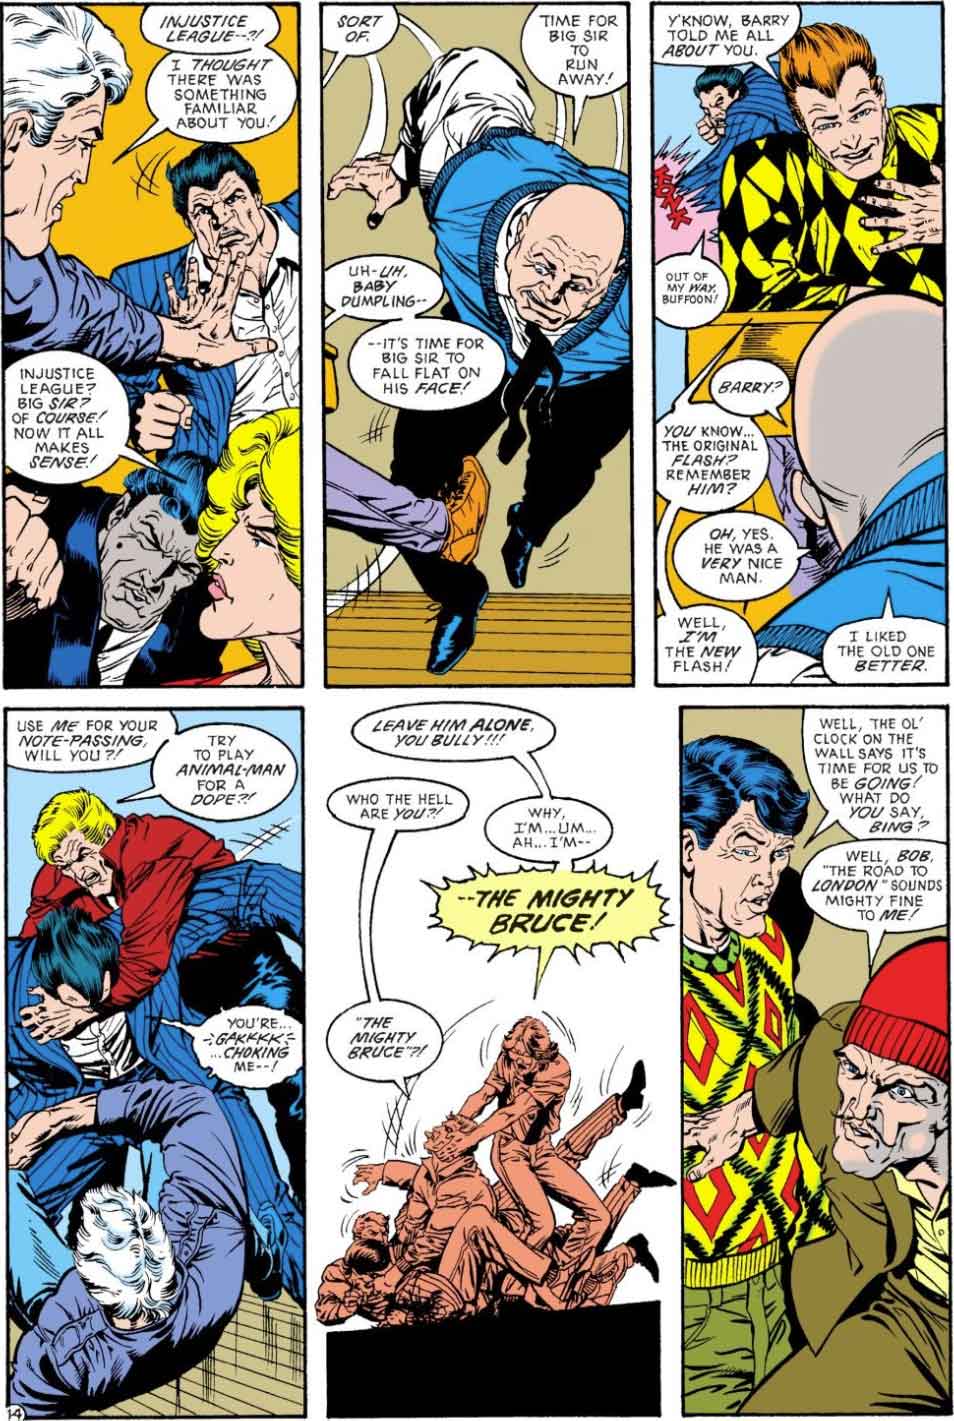 Justice League Europe #6 by Keith Giffen, J.M. DeMatteis, Bart Sears and Pablo Marcos